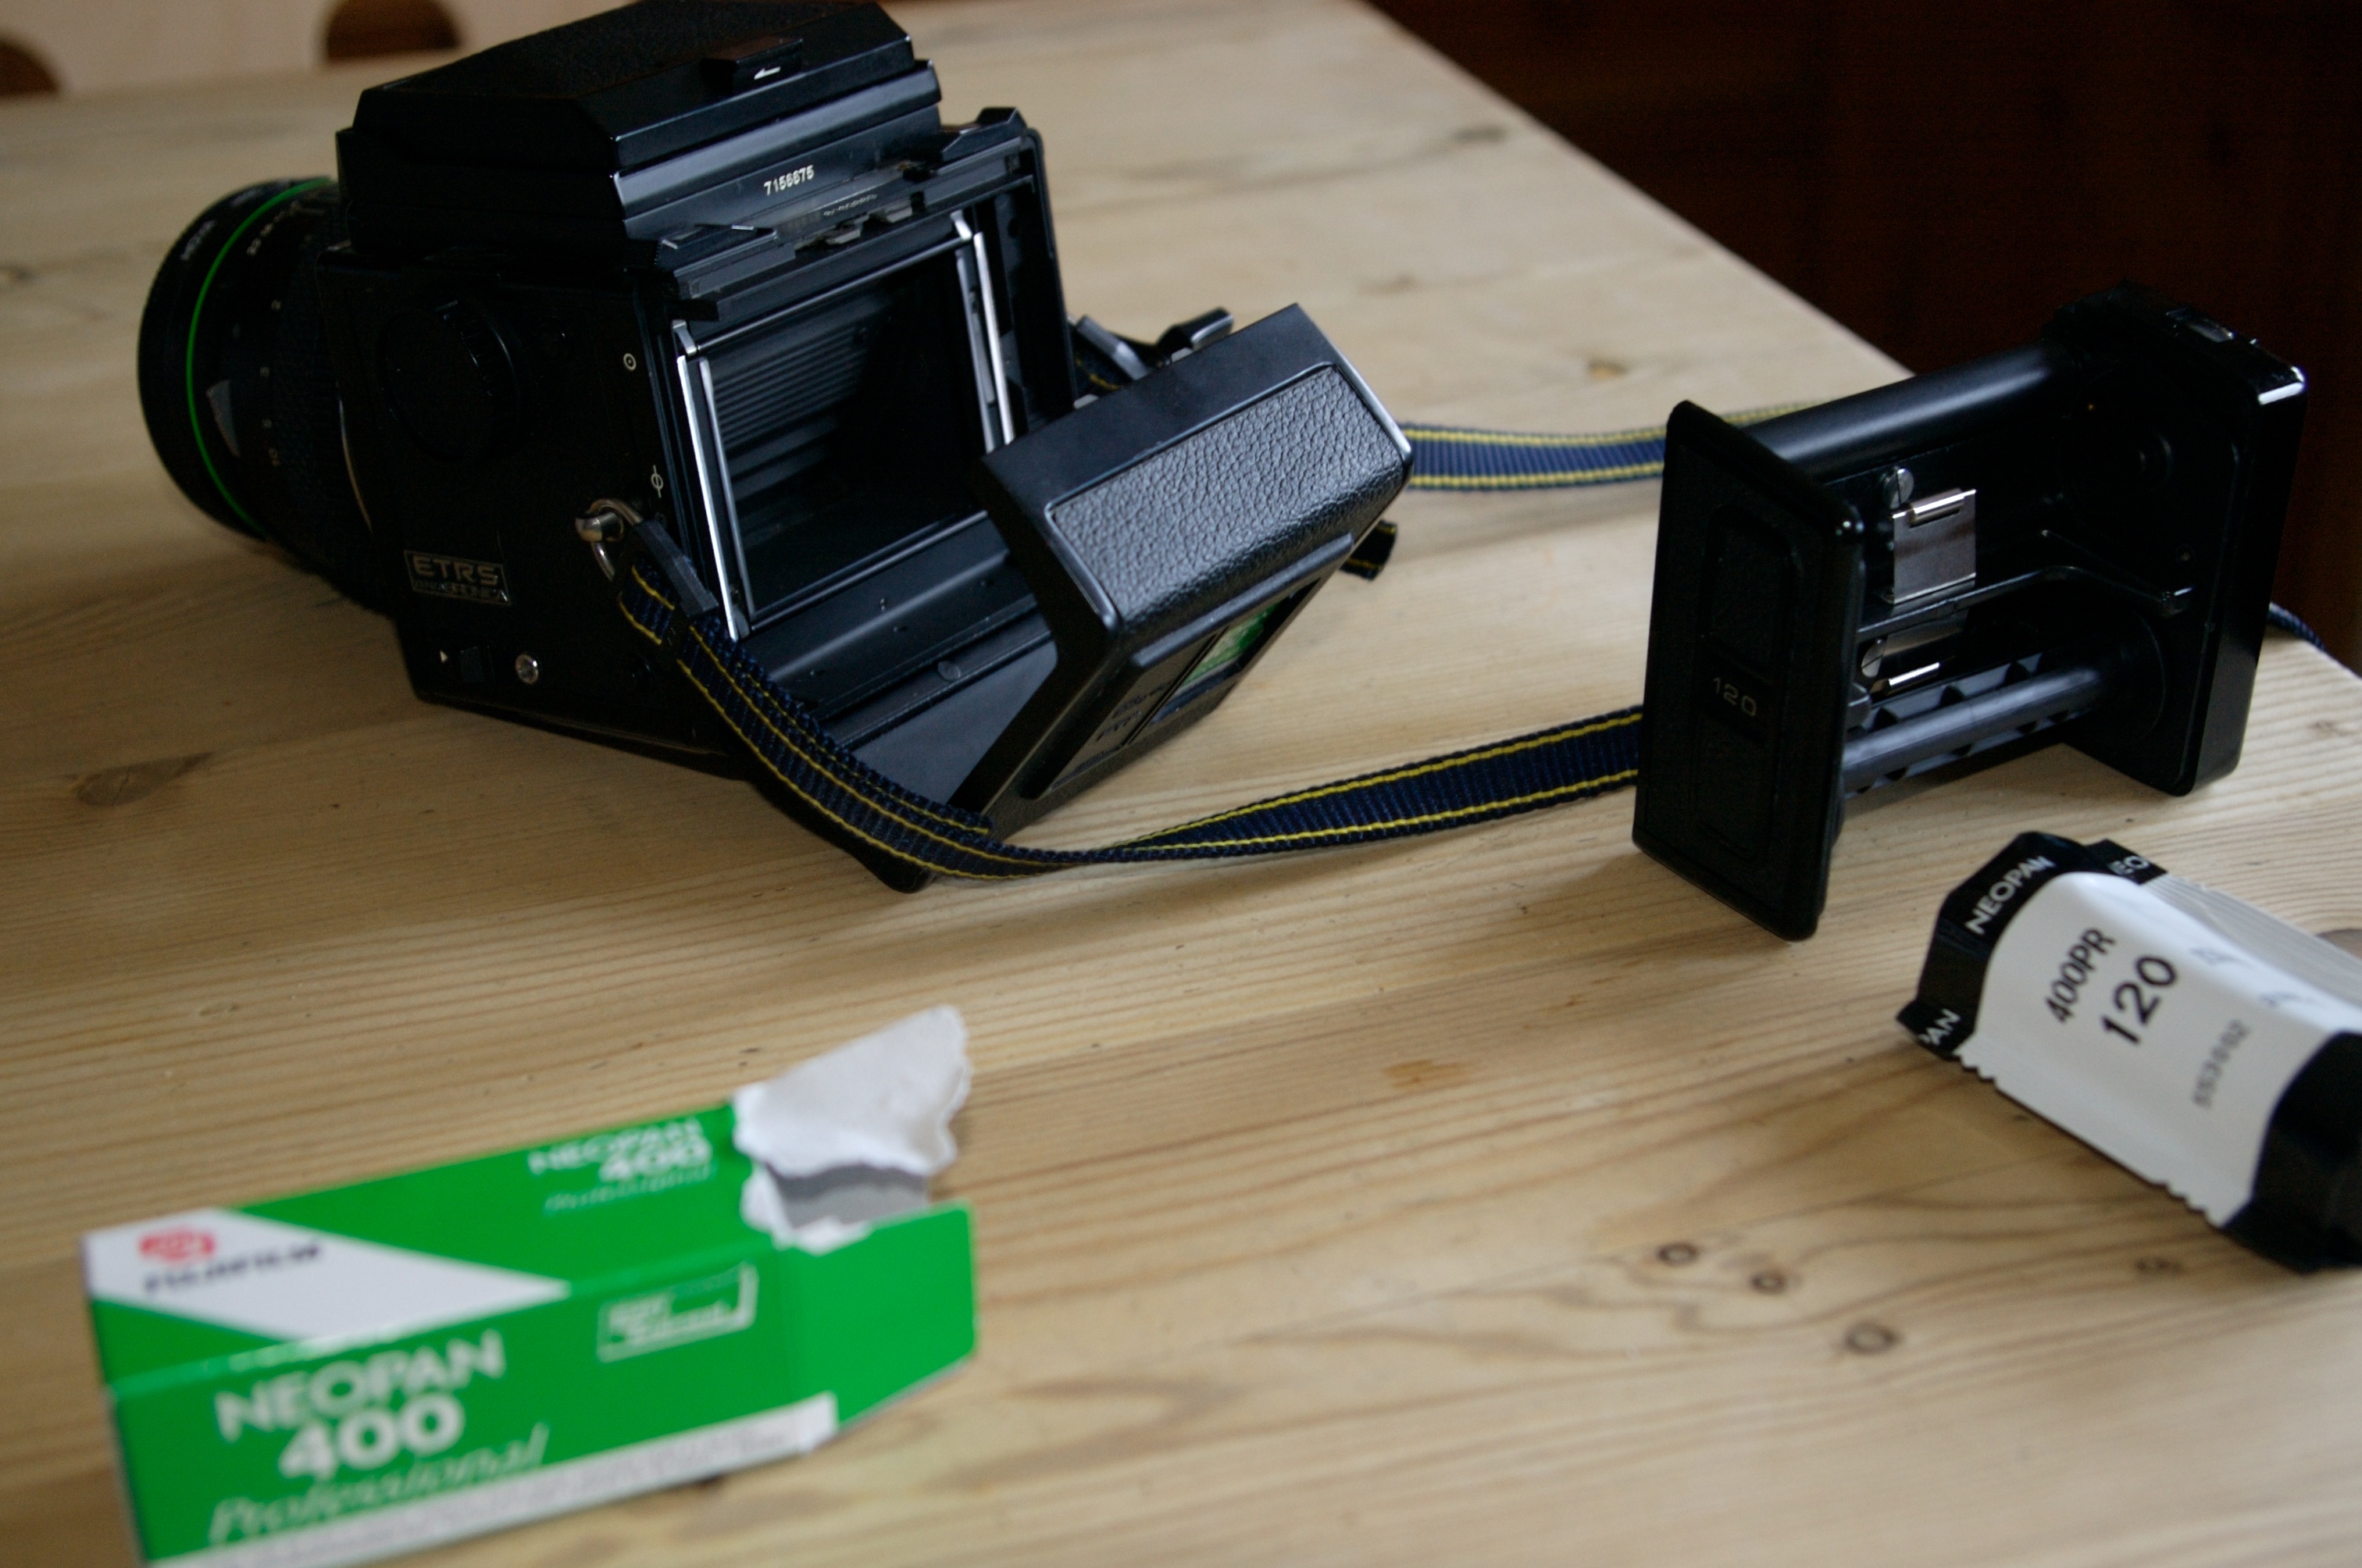 Loading a Bronica with Neopan